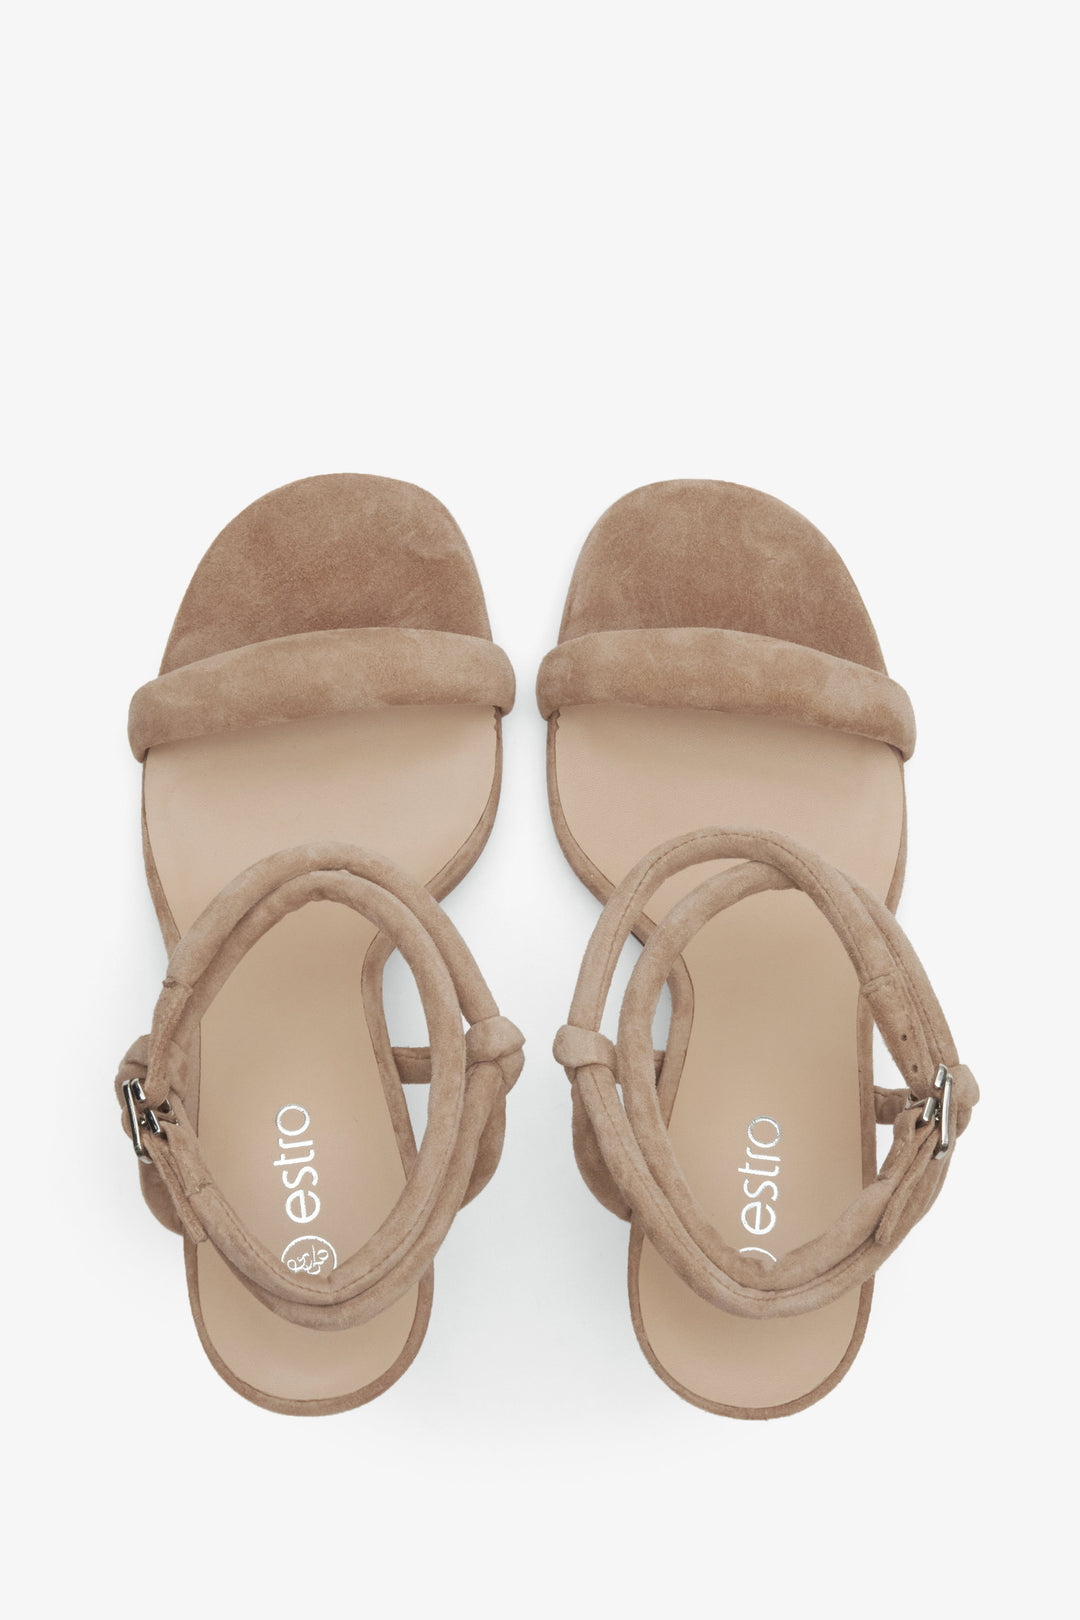 Women's beige leather & velour strappy sandals of Estro brand - presentation from above.